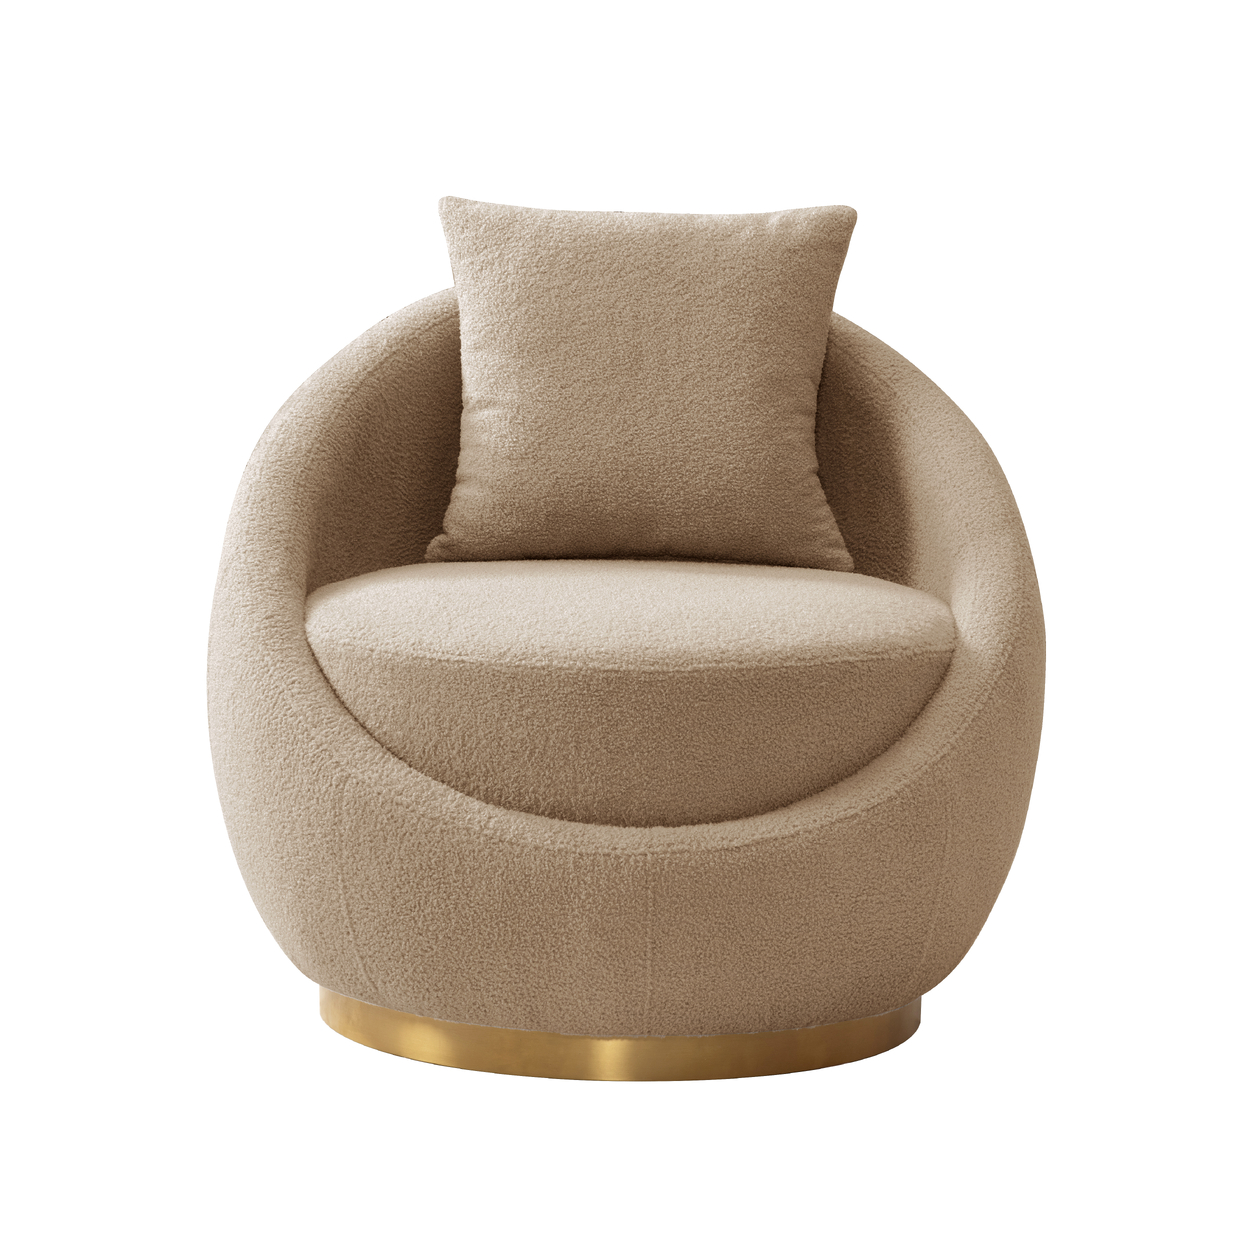 Iconic Home St Barths Accent Chair Cozy Plush Faux Shearling Upholstered Loose Seat Back Cushion Gold Tone Metal Base - Cream